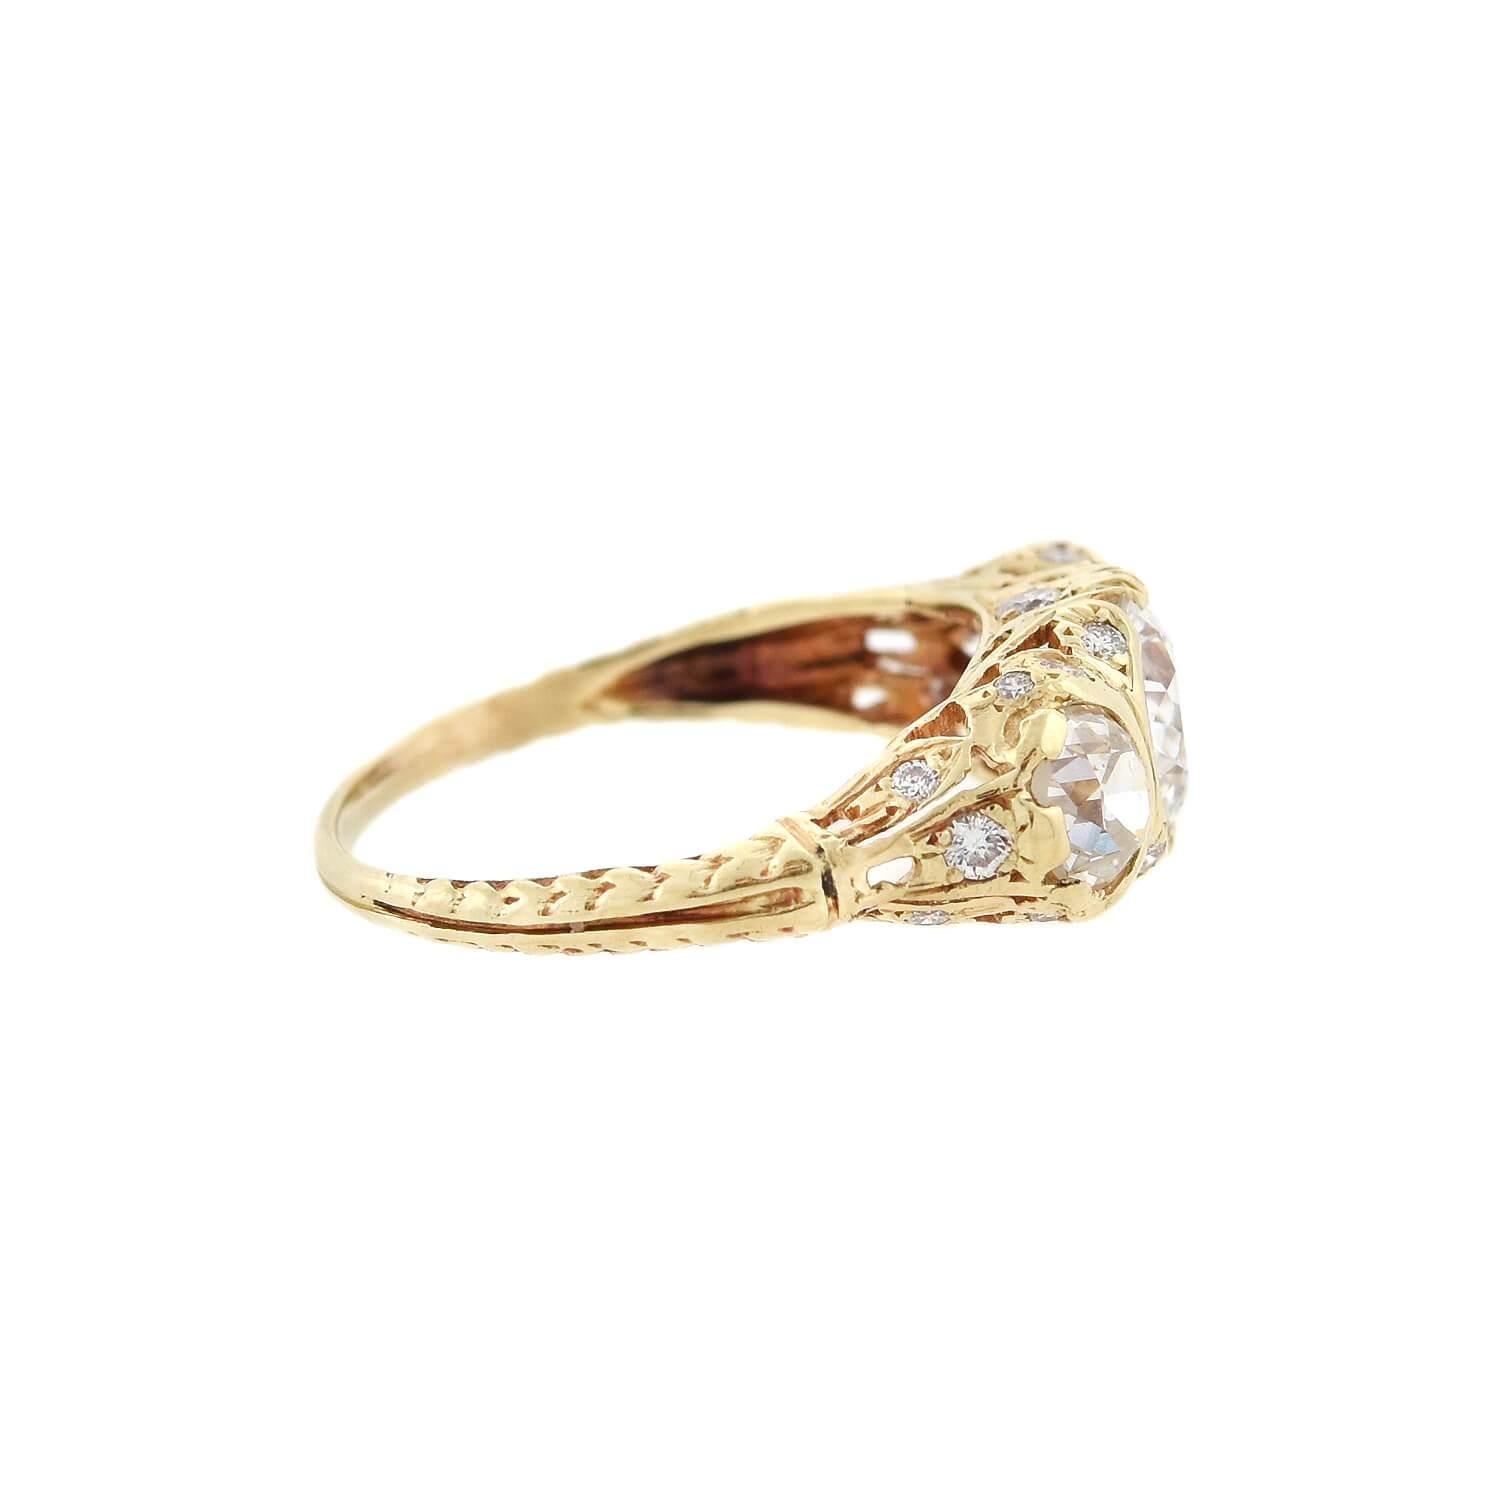 An incredible ring from the Edwardian (ca1910s) era! Crafted in 14kt yellow gold, this ring adorns three gorgeous Old European Cut diamonds. The central diamond measures approximately 1ctw and the two side diamonds weigh about 0.25ctw each, all in